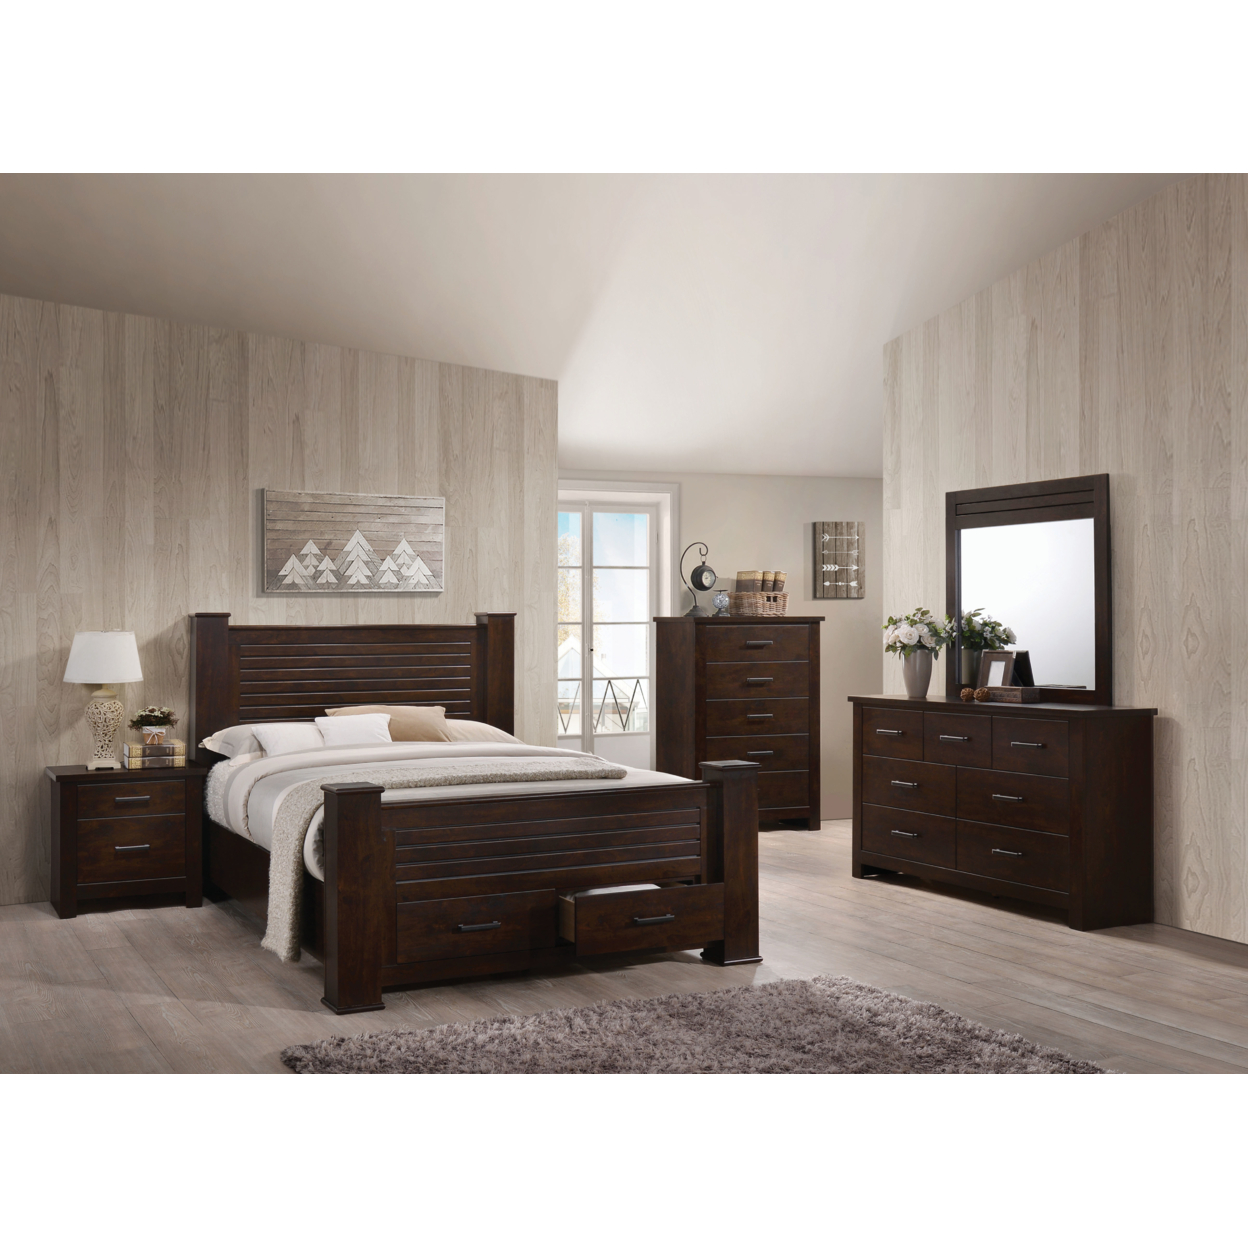 Modern Style Deluxe Queen Size Poster Bed With Storage, Brown- Saltoro Sherpi